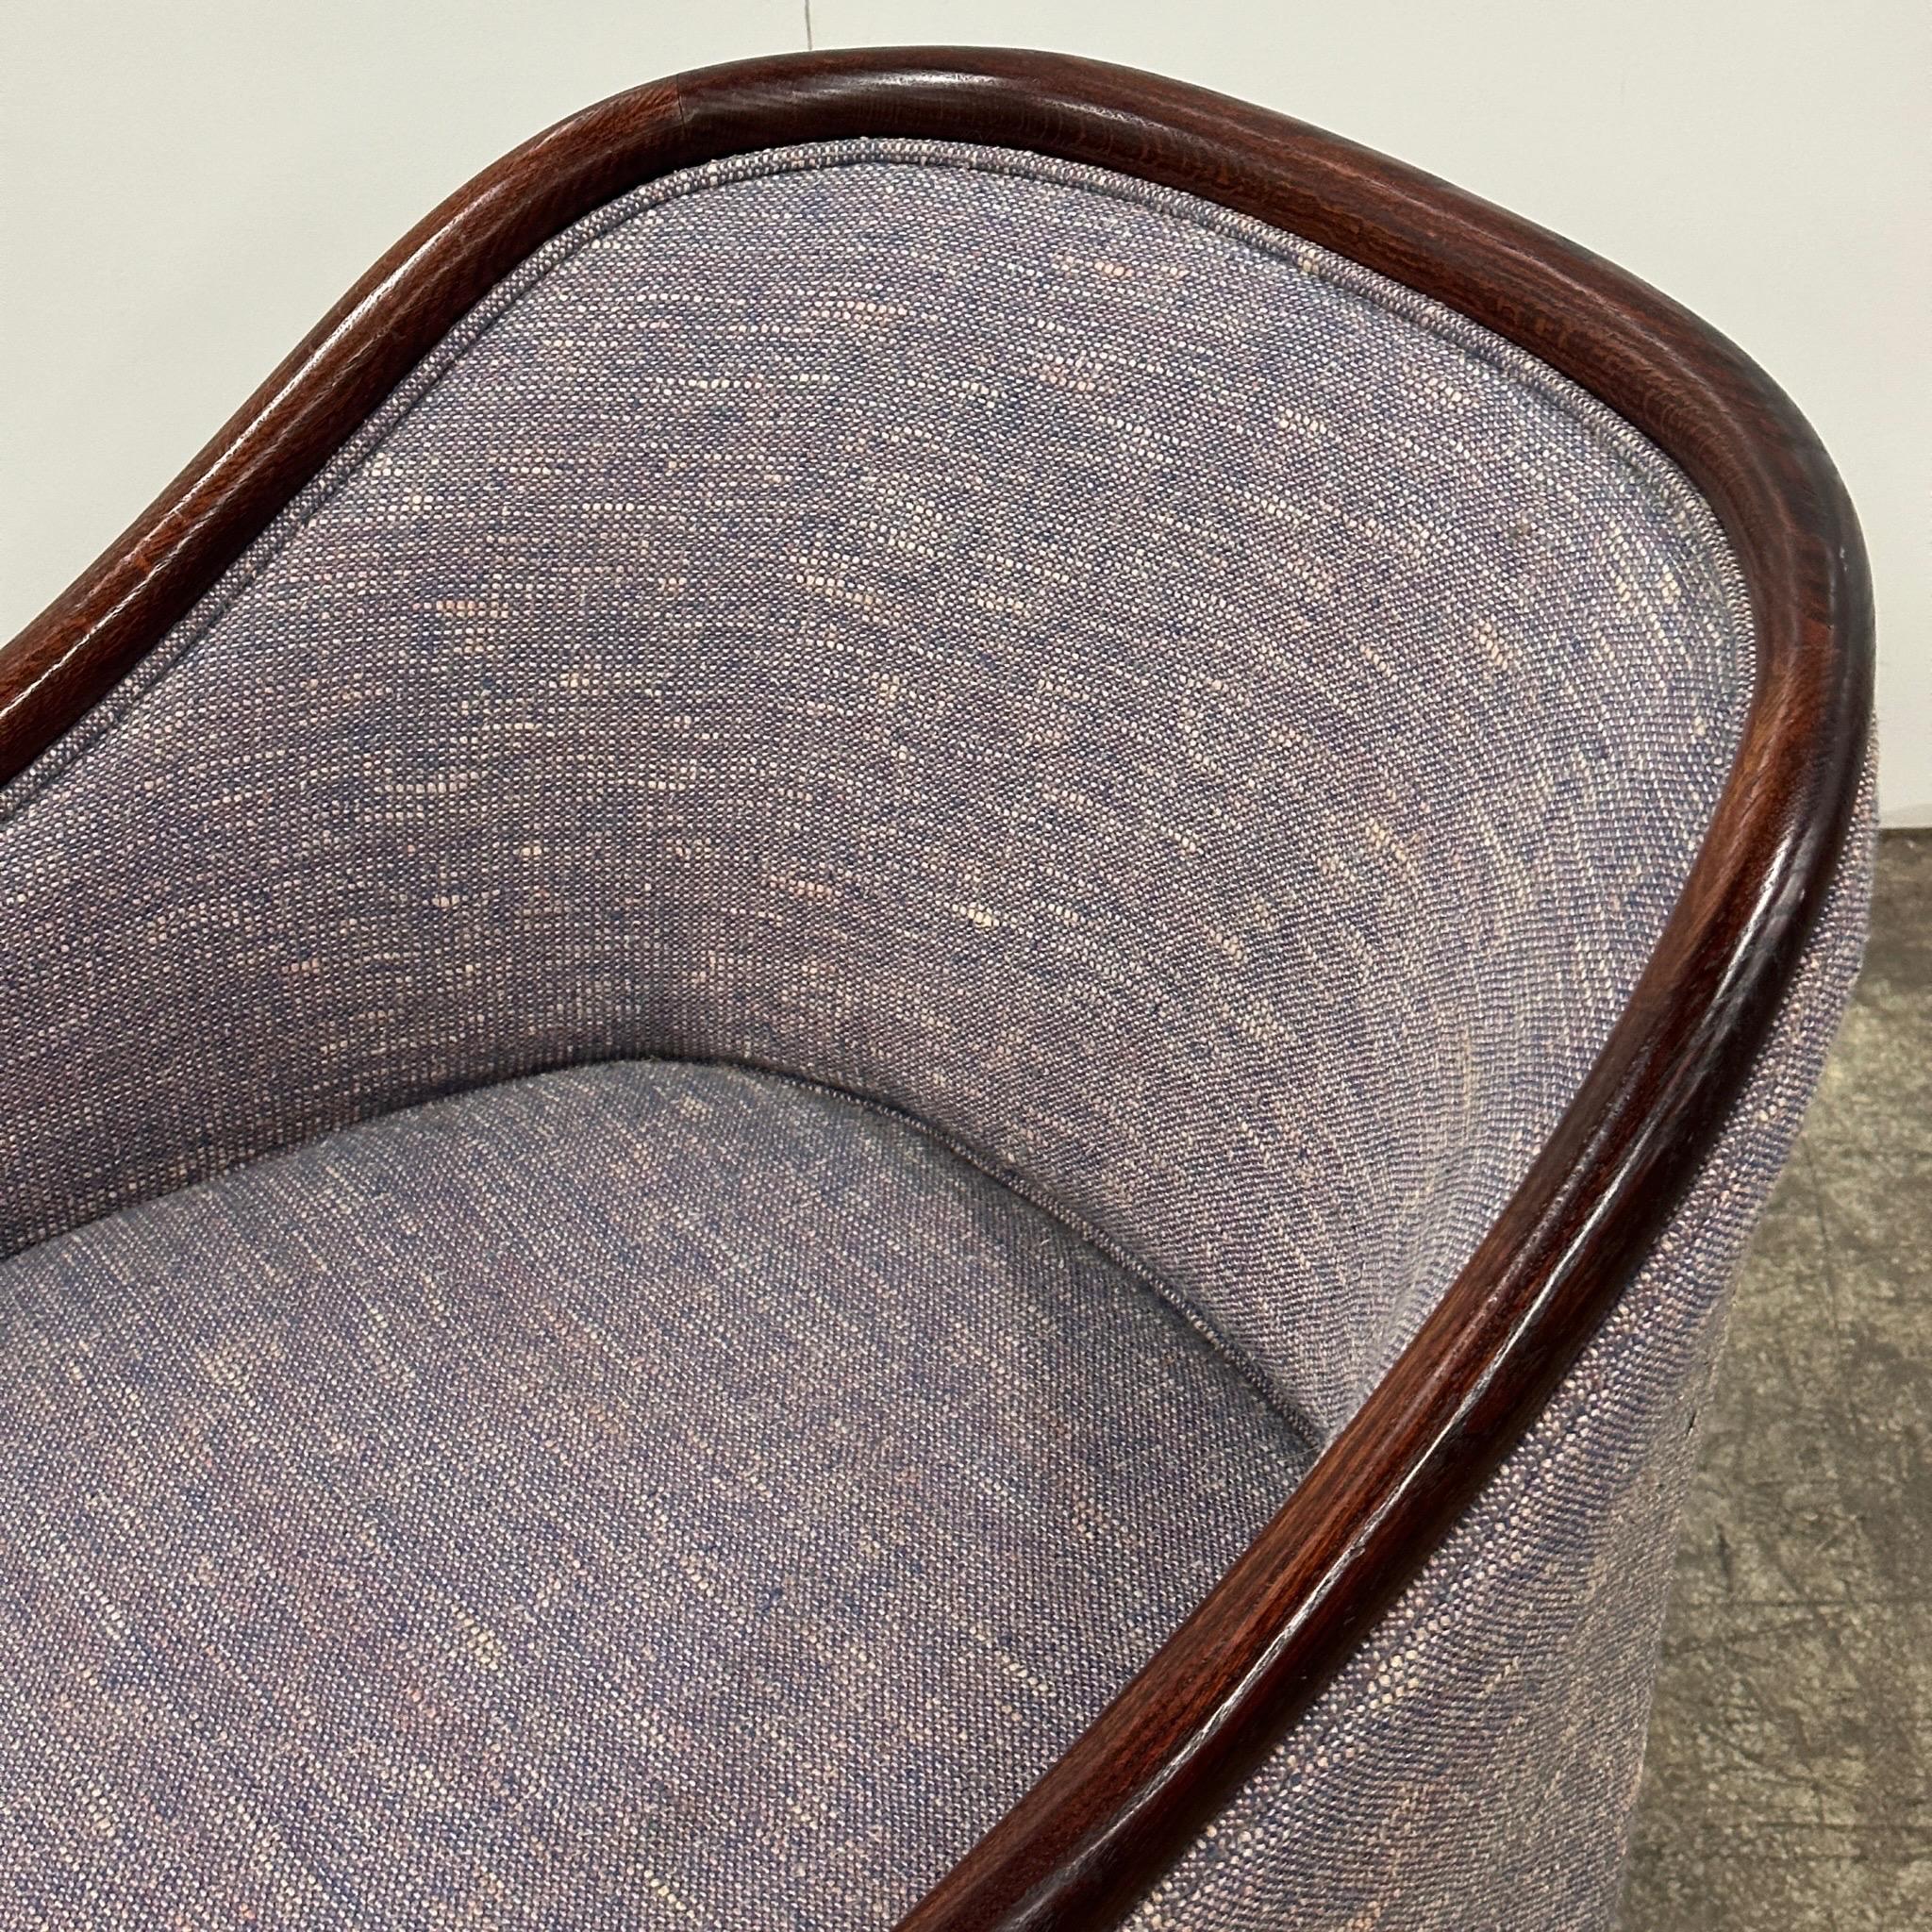 c. 1980s. Upholstered in purple/grey contract fabric. Bentwood construction.  